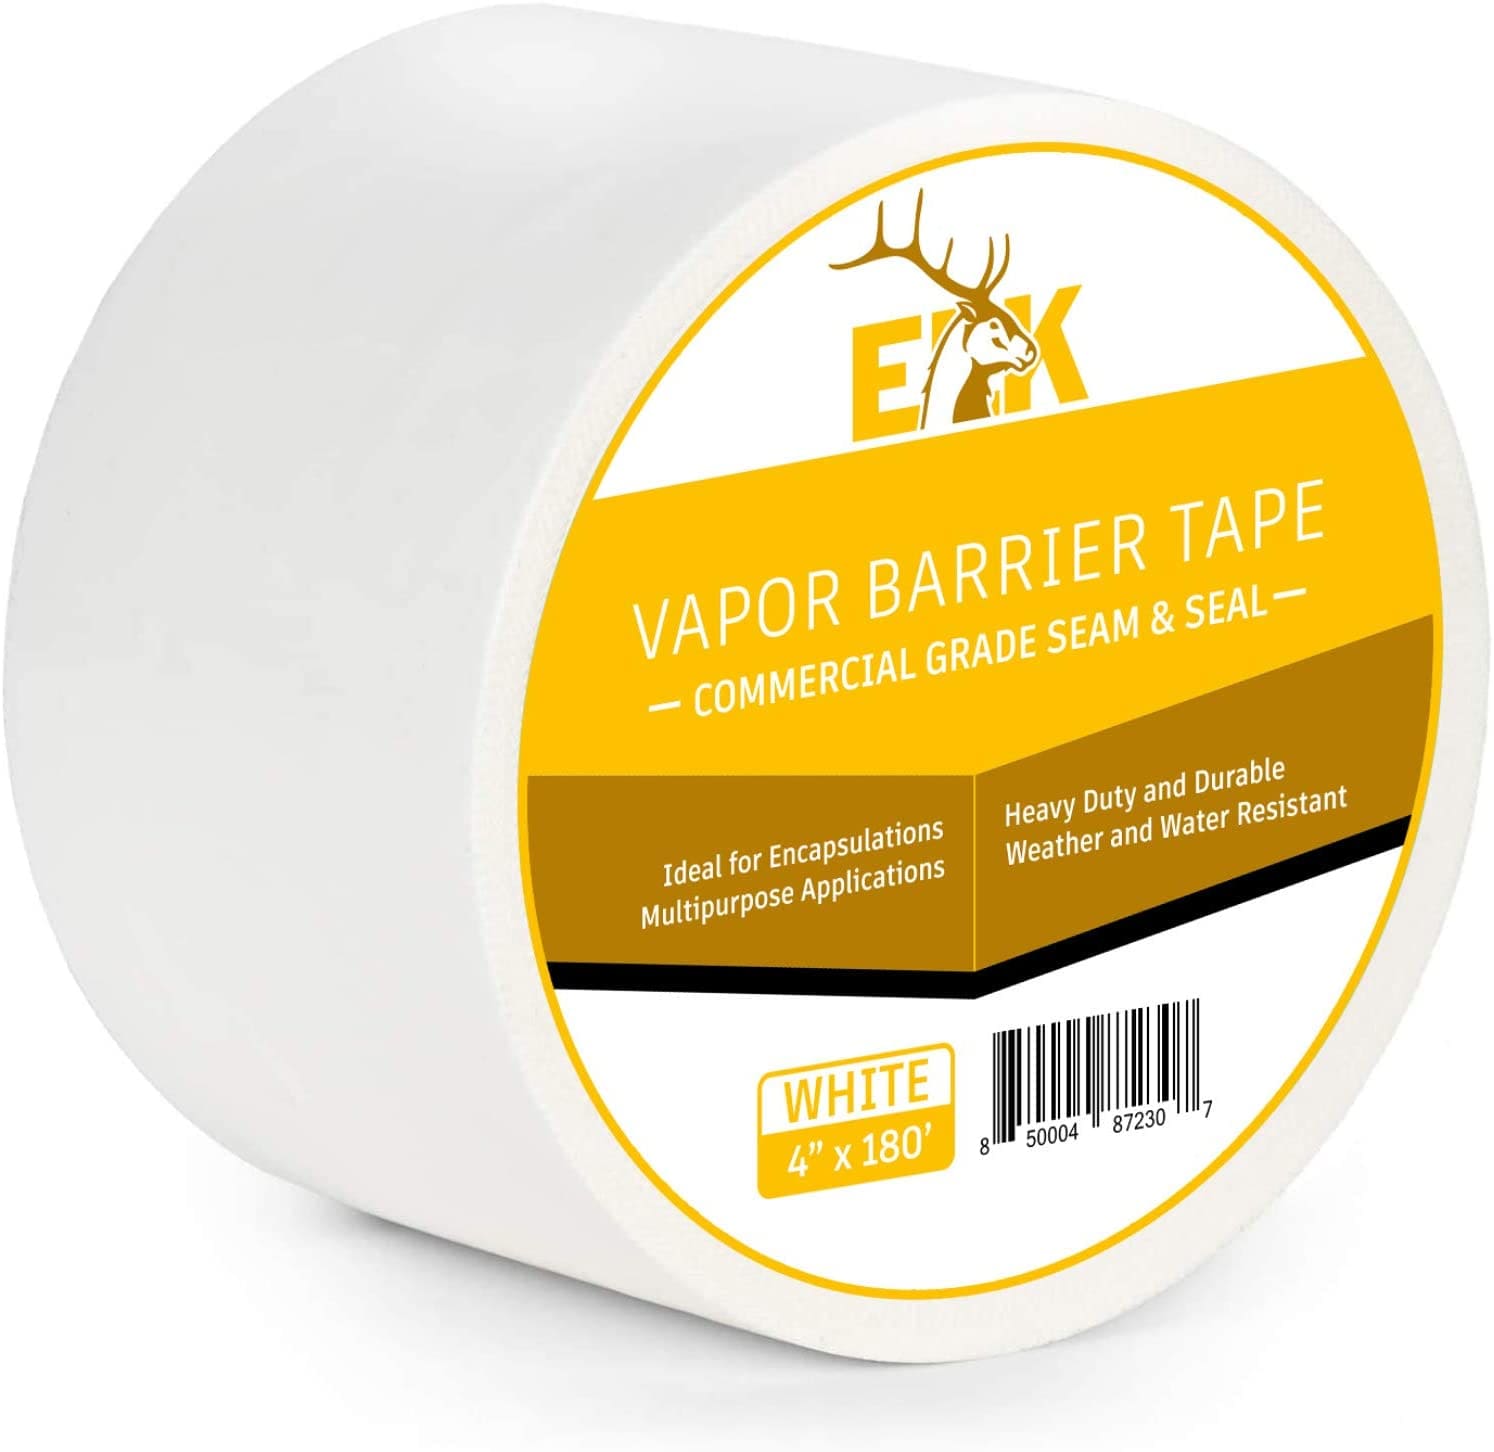 ZIP System 90-ft Panel System Tape at